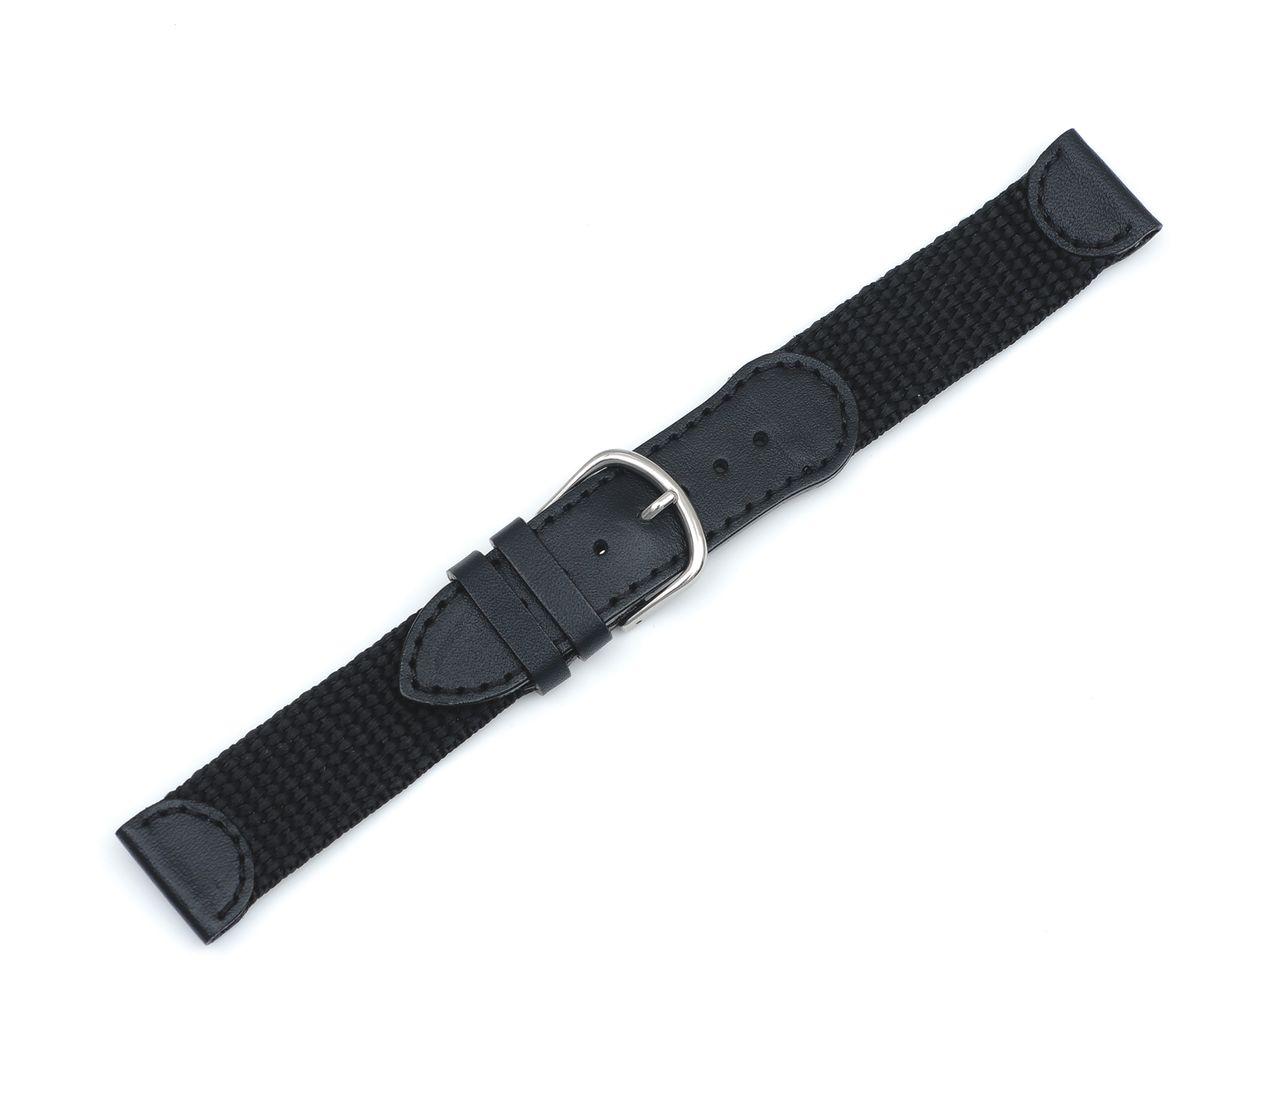 Victorinox Original - in Black - & mm Strap 20001 mm Nylon buckle - 0 19 with Leather